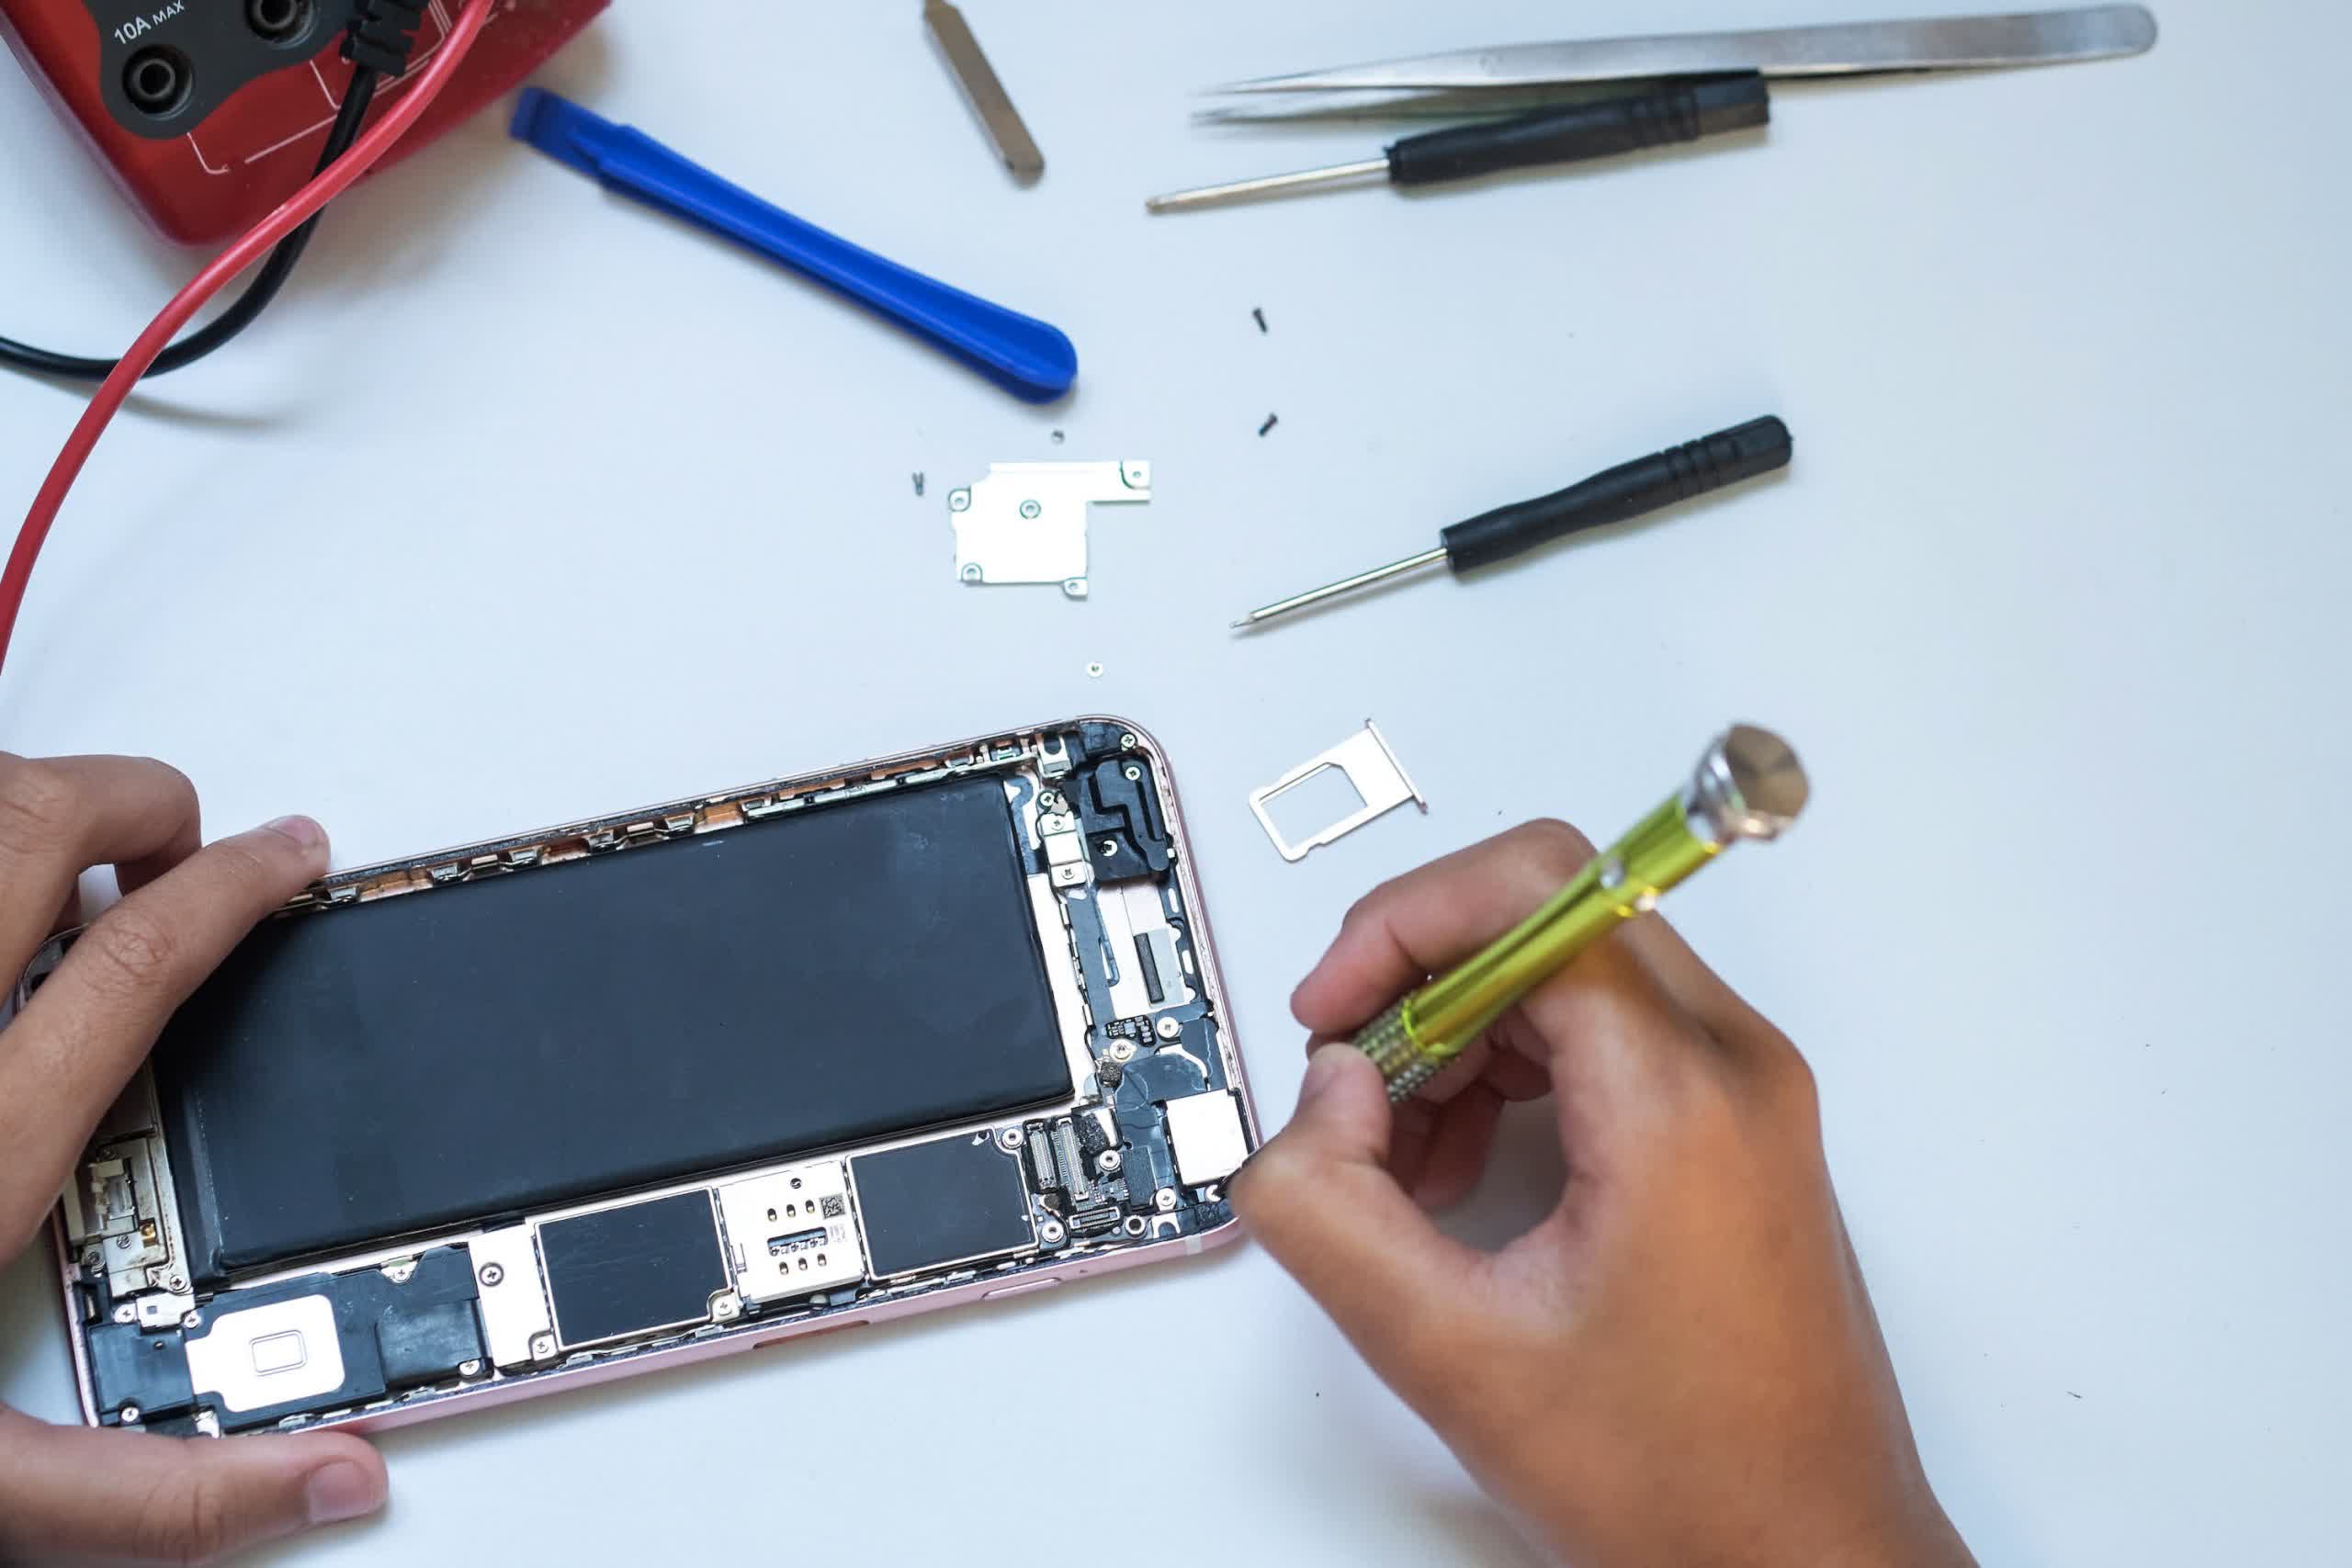 Google voices support for Oregon's proposed right-to-repair law